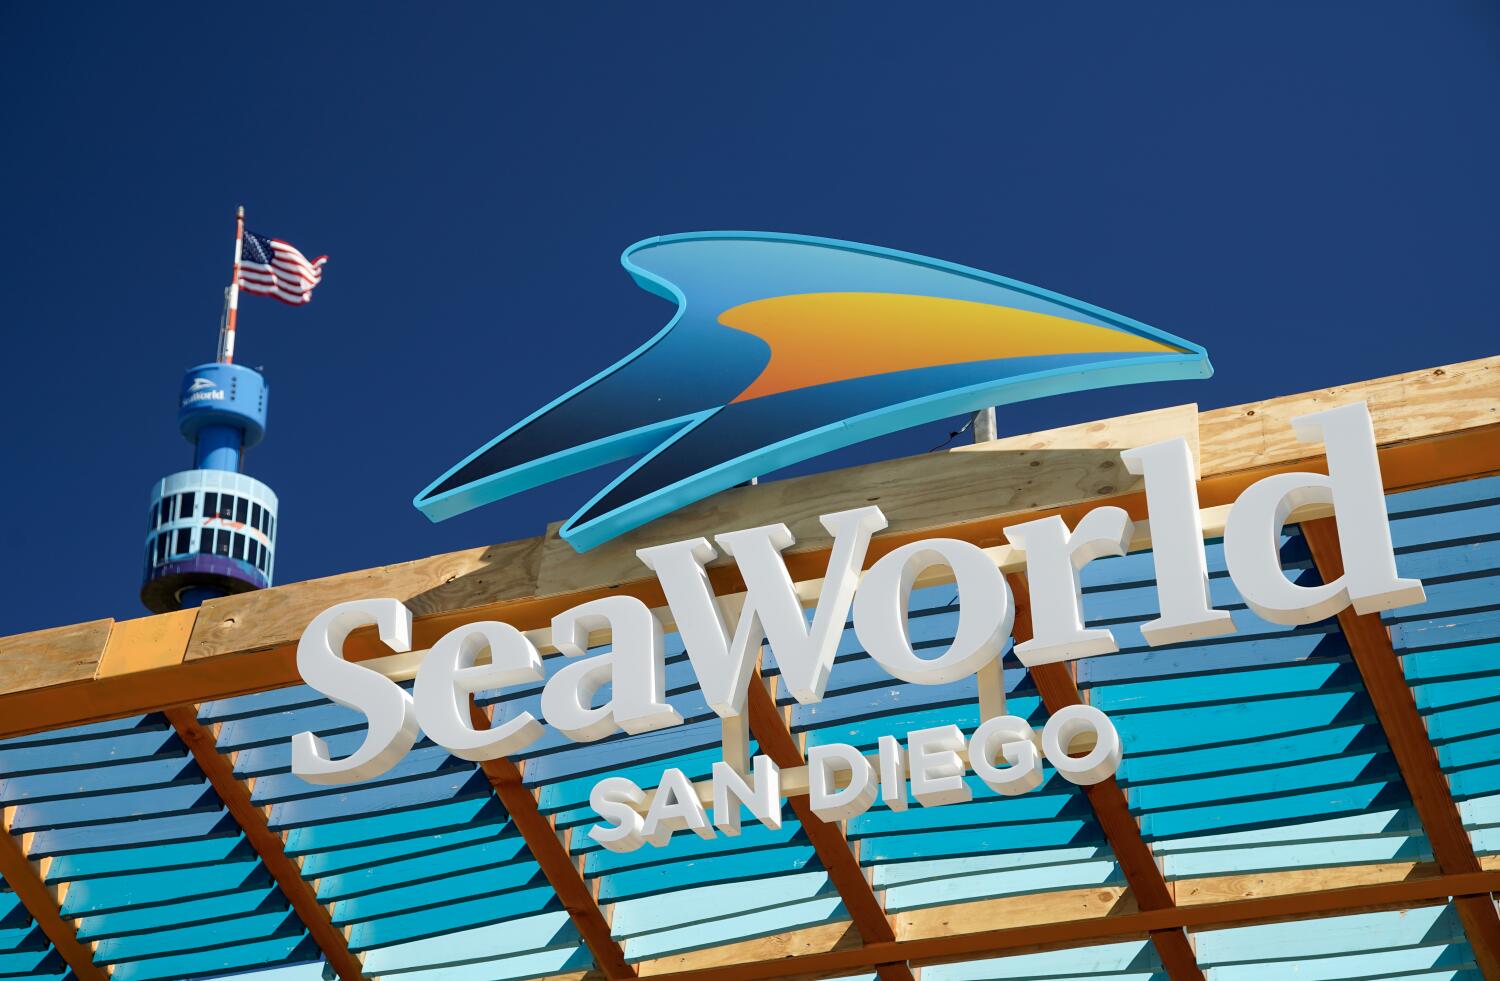 New entrance sign for SeaWorld San Diego.